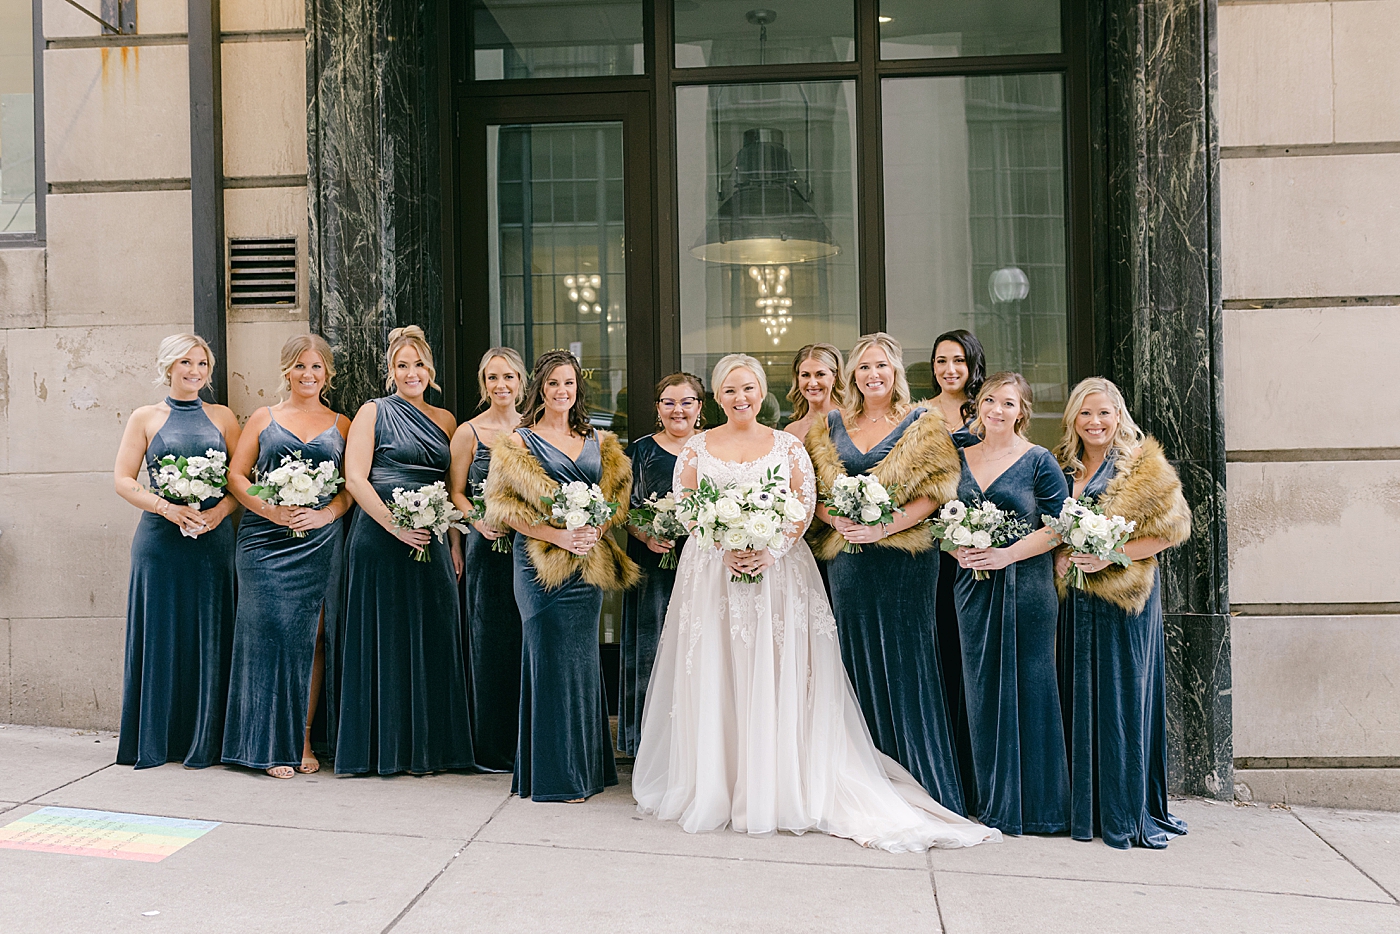 Bridal party photos at Noelle, Nashville Wedding | Photo by Hope Helmuth Photography